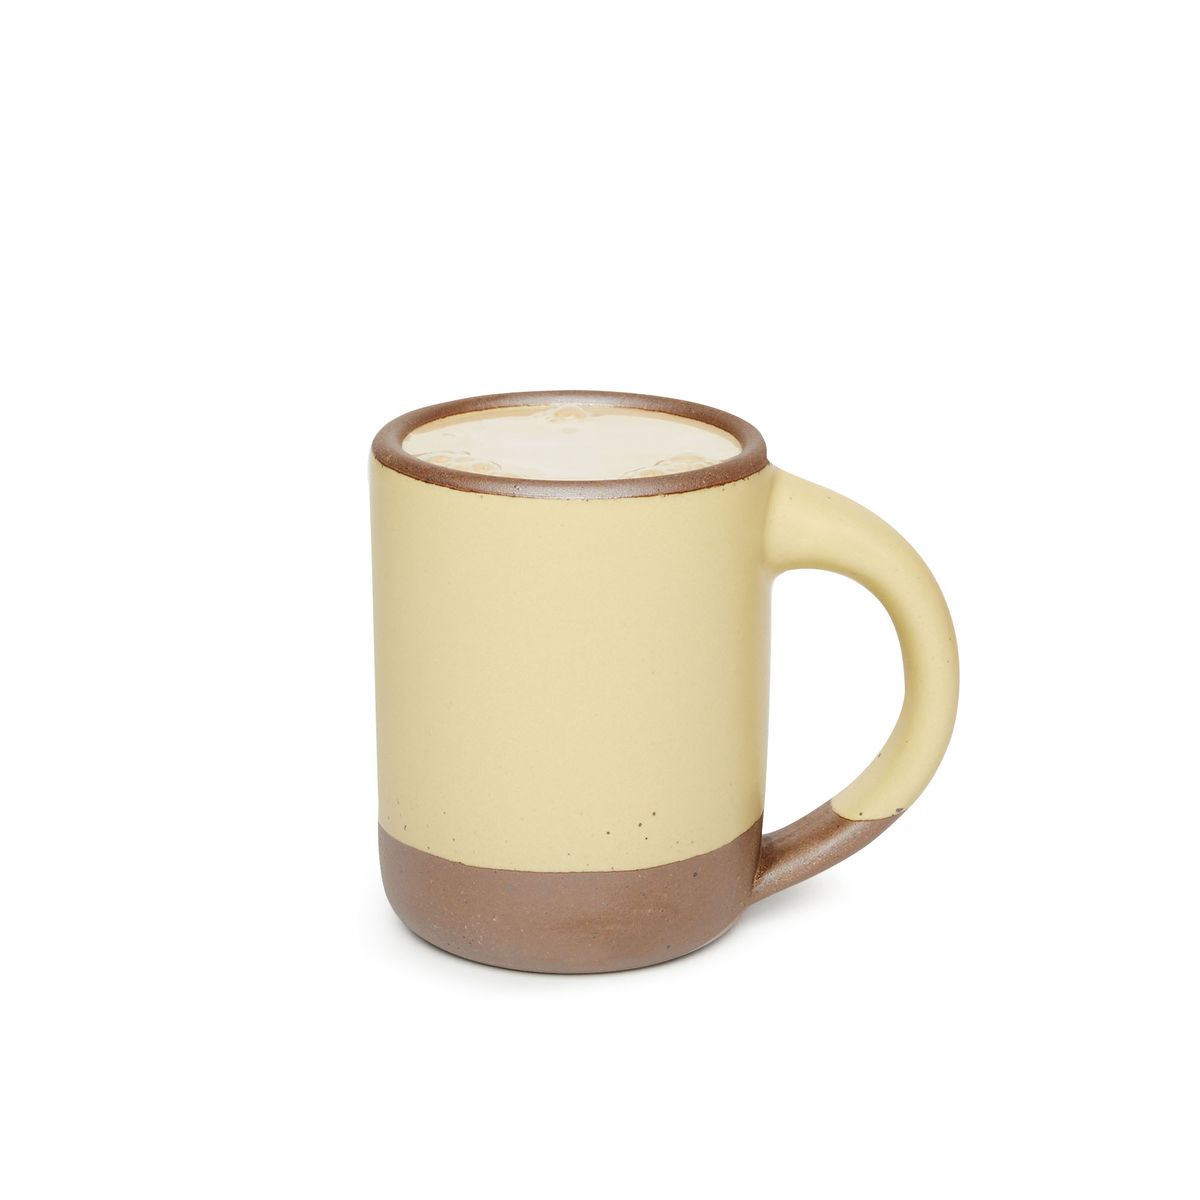 A medium sized ceramic mug with handle in a light butter yellow color featuring iron speckles and unglazed rim and bottom base, filled with light coffee.